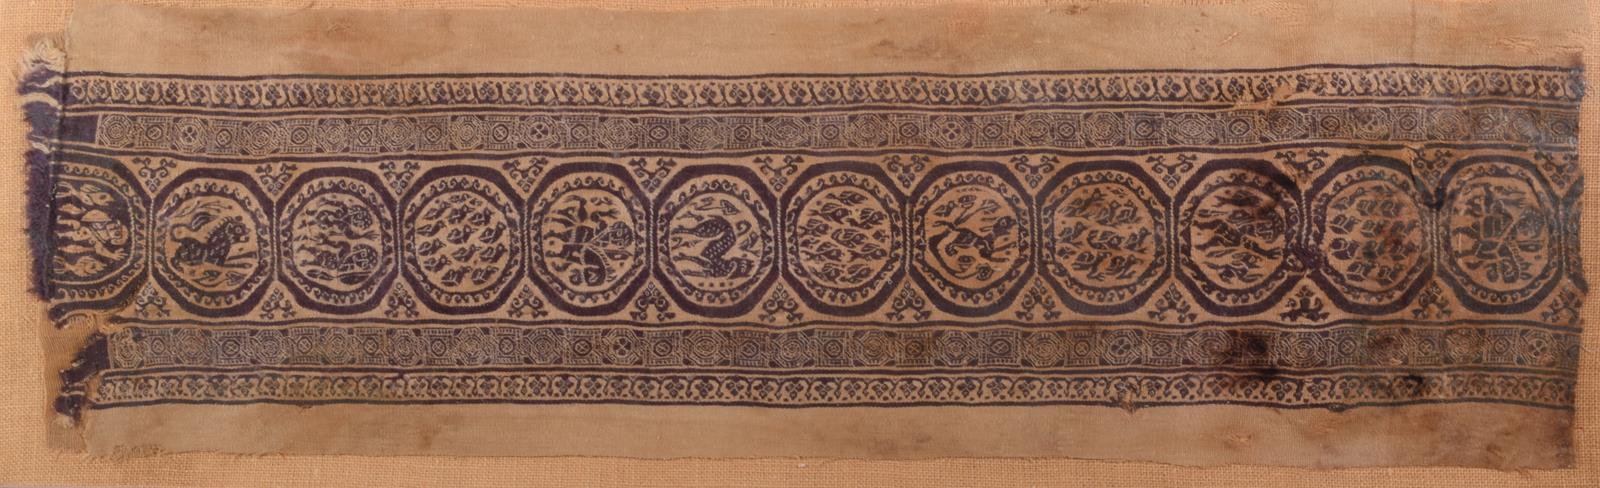 An Egyptian Coptic textile fragment, linen and wool, with a central band of roundels depicting - Image 2 of 3